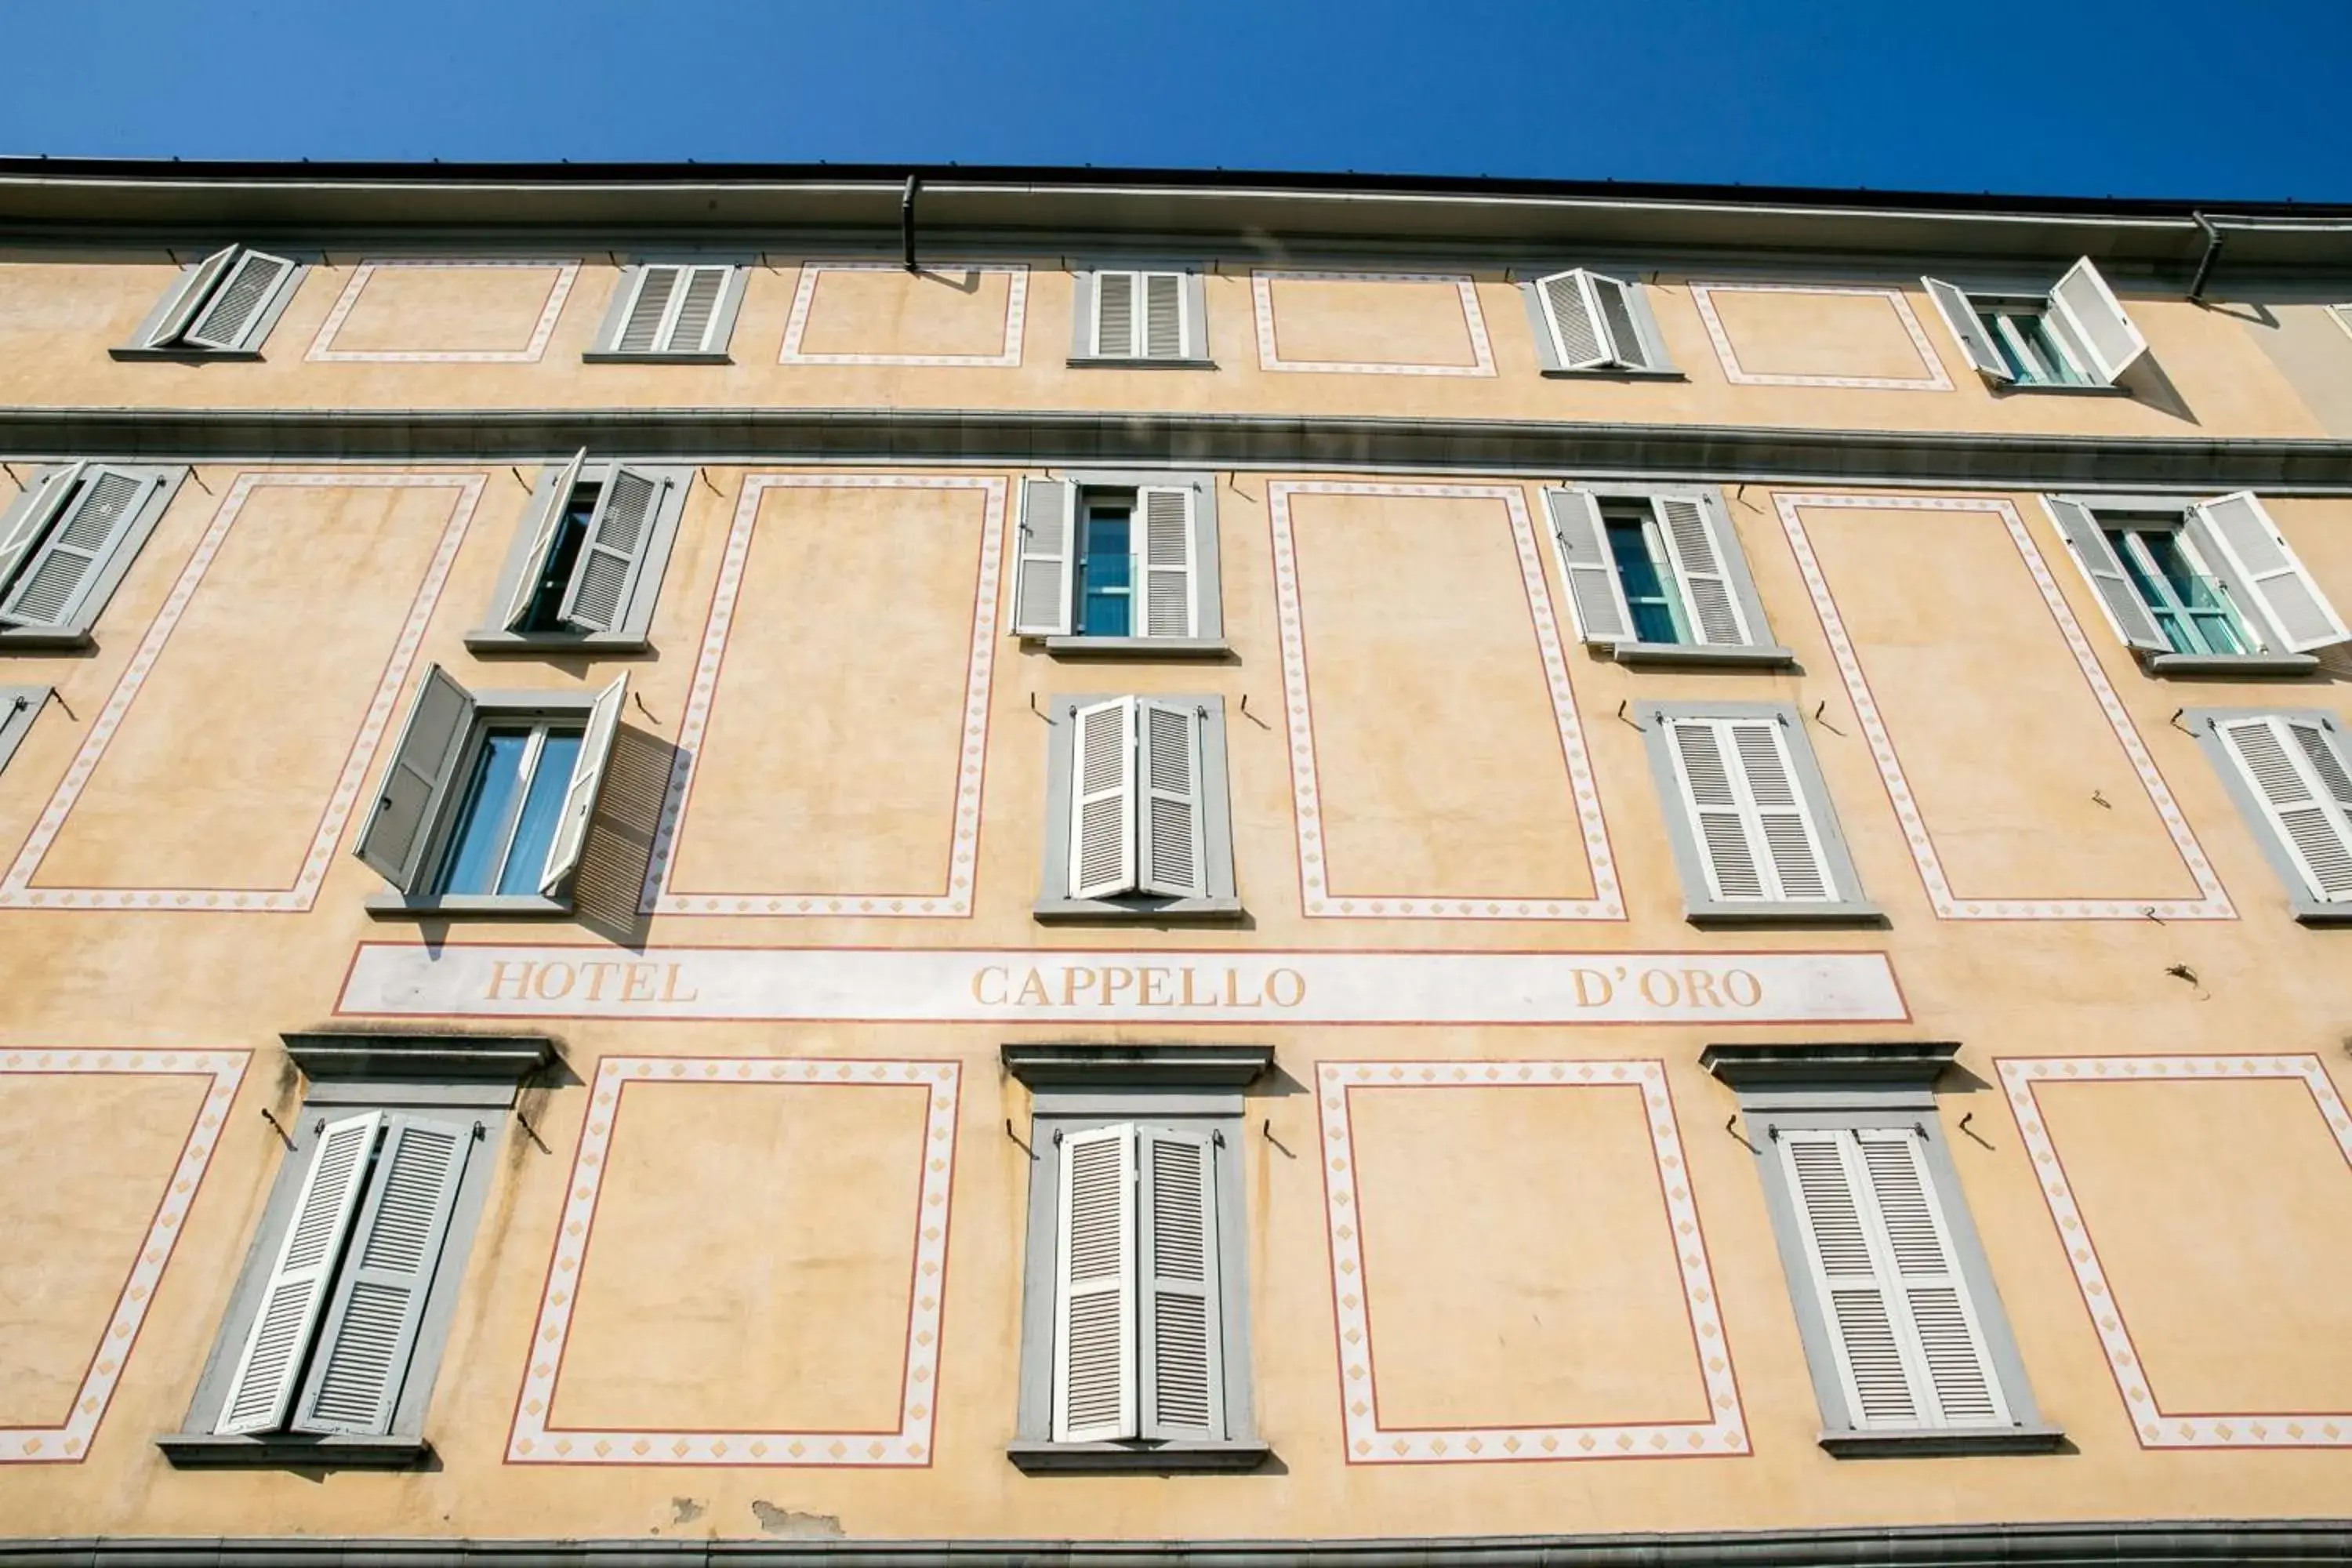 Property Building in Best Western Hotel Cappello d'Oro